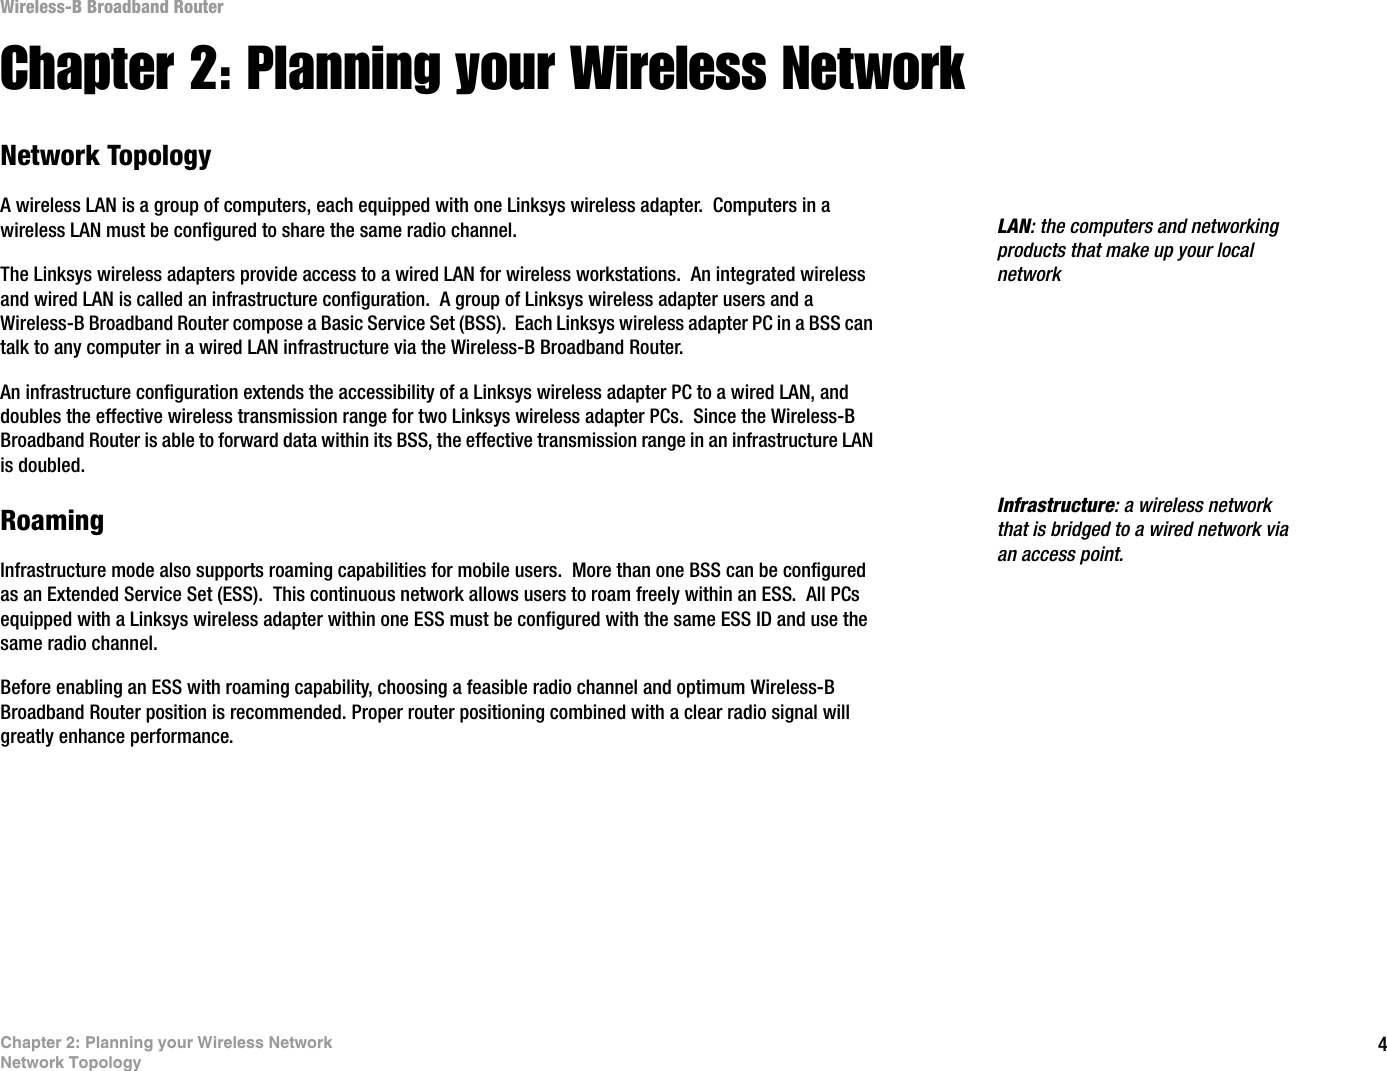 4Chapter 2: Planning your Wireless NetworkNetwork TopologyWireless-B Broadband RouterChapter 2: Planning your Wireless NetworkNetwork TopologyA wireless LAN is a group of computers, each equipped with one Linksys wireless adapter.  Computers in a wireless LAN must be configured to share the same radio channel.The Linksys wireless adapters provide access to a wired LAN for wireless workstations.  An integrated wireless and wired LAN is called an infrastructure configuration.  A group of Linksys wireless adapter users and a Wireless-B Broadband Router compose a Basic Service Set (BSS).  Each Linksys wireless adapter PC in a BSS can talk to any computer in a wired LAN infrastructure via the Wireless-B Broadband Router.An infrastructure configuration extends the accessibility of a Linksys wireless adapter PC to a wired LAN, and doubles the effective wireless transmission range for two Linksys wireless adapter PCs.  Since the Wireless-B Broadband Router is able to forward data within its BSS, the effective transmission range in an infrastructure LAN is doubled.RoamingInfrastructure mode also supports roaming capabilities for mobile users.  More than one BSS can be configured as an Extended Service Set (ESS).  This continuous network allows users to roam freely within an ESS.  All PCs equipped with a Linksys wireless adapter within one ESS must be configured with the same ESS ID and use the same radio channel.Before enabling an ESS with roaming capability, choosing a feasible radio channel and optimum Wireless-B Broadband Router position is recommended. Proper router positioning combined with a clear radio signal will greatly enhance performance.Infrastructure: a wireless network that is bridged to a wired network via an access point.LAN: the computers and networking products that make up your local network